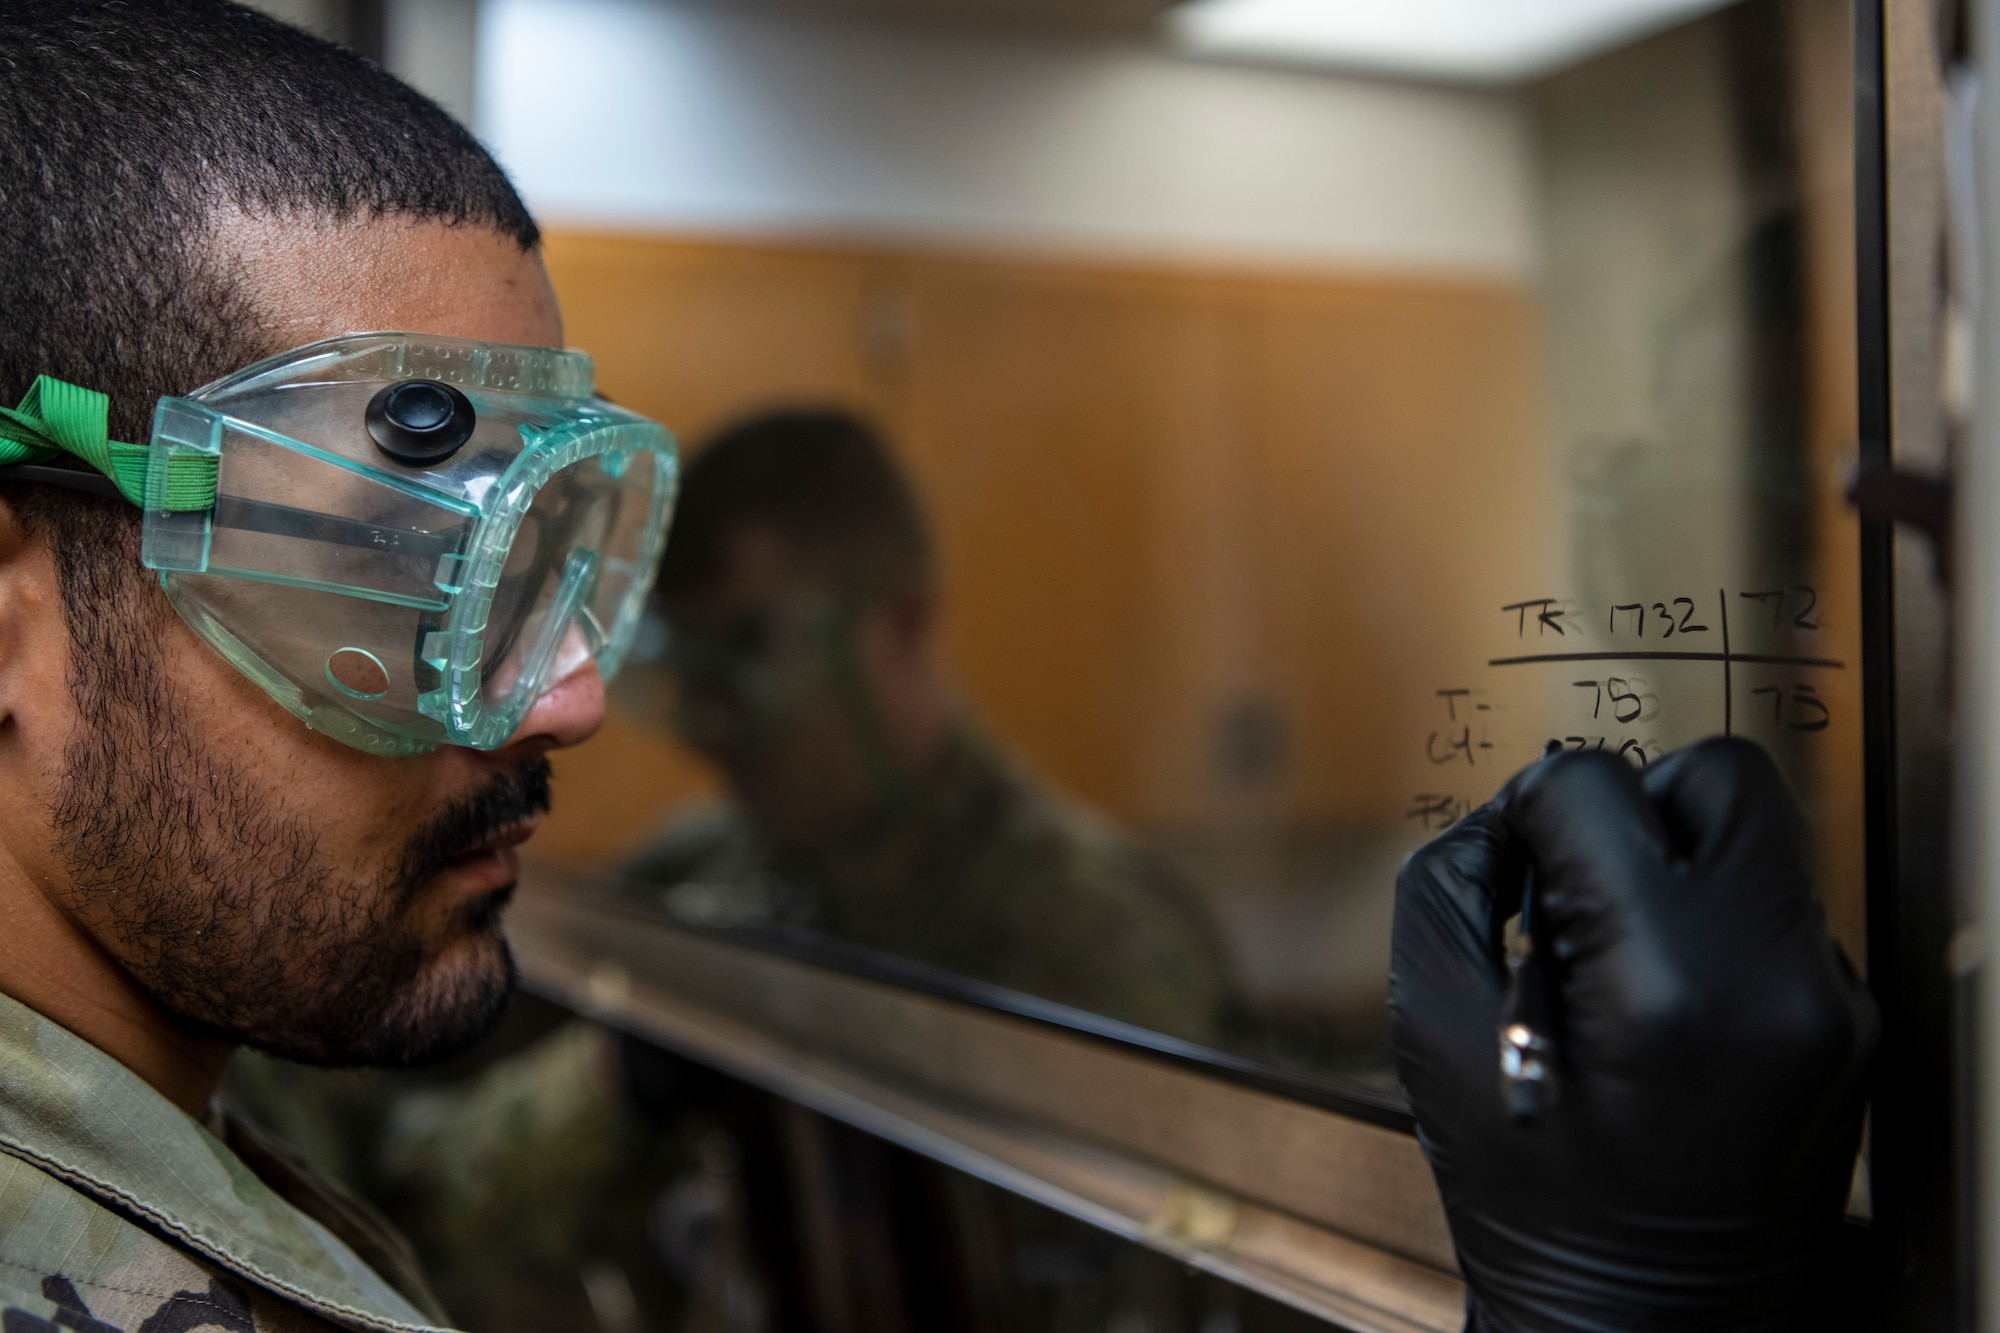 a man wearing large green goggles works in a chemical environment